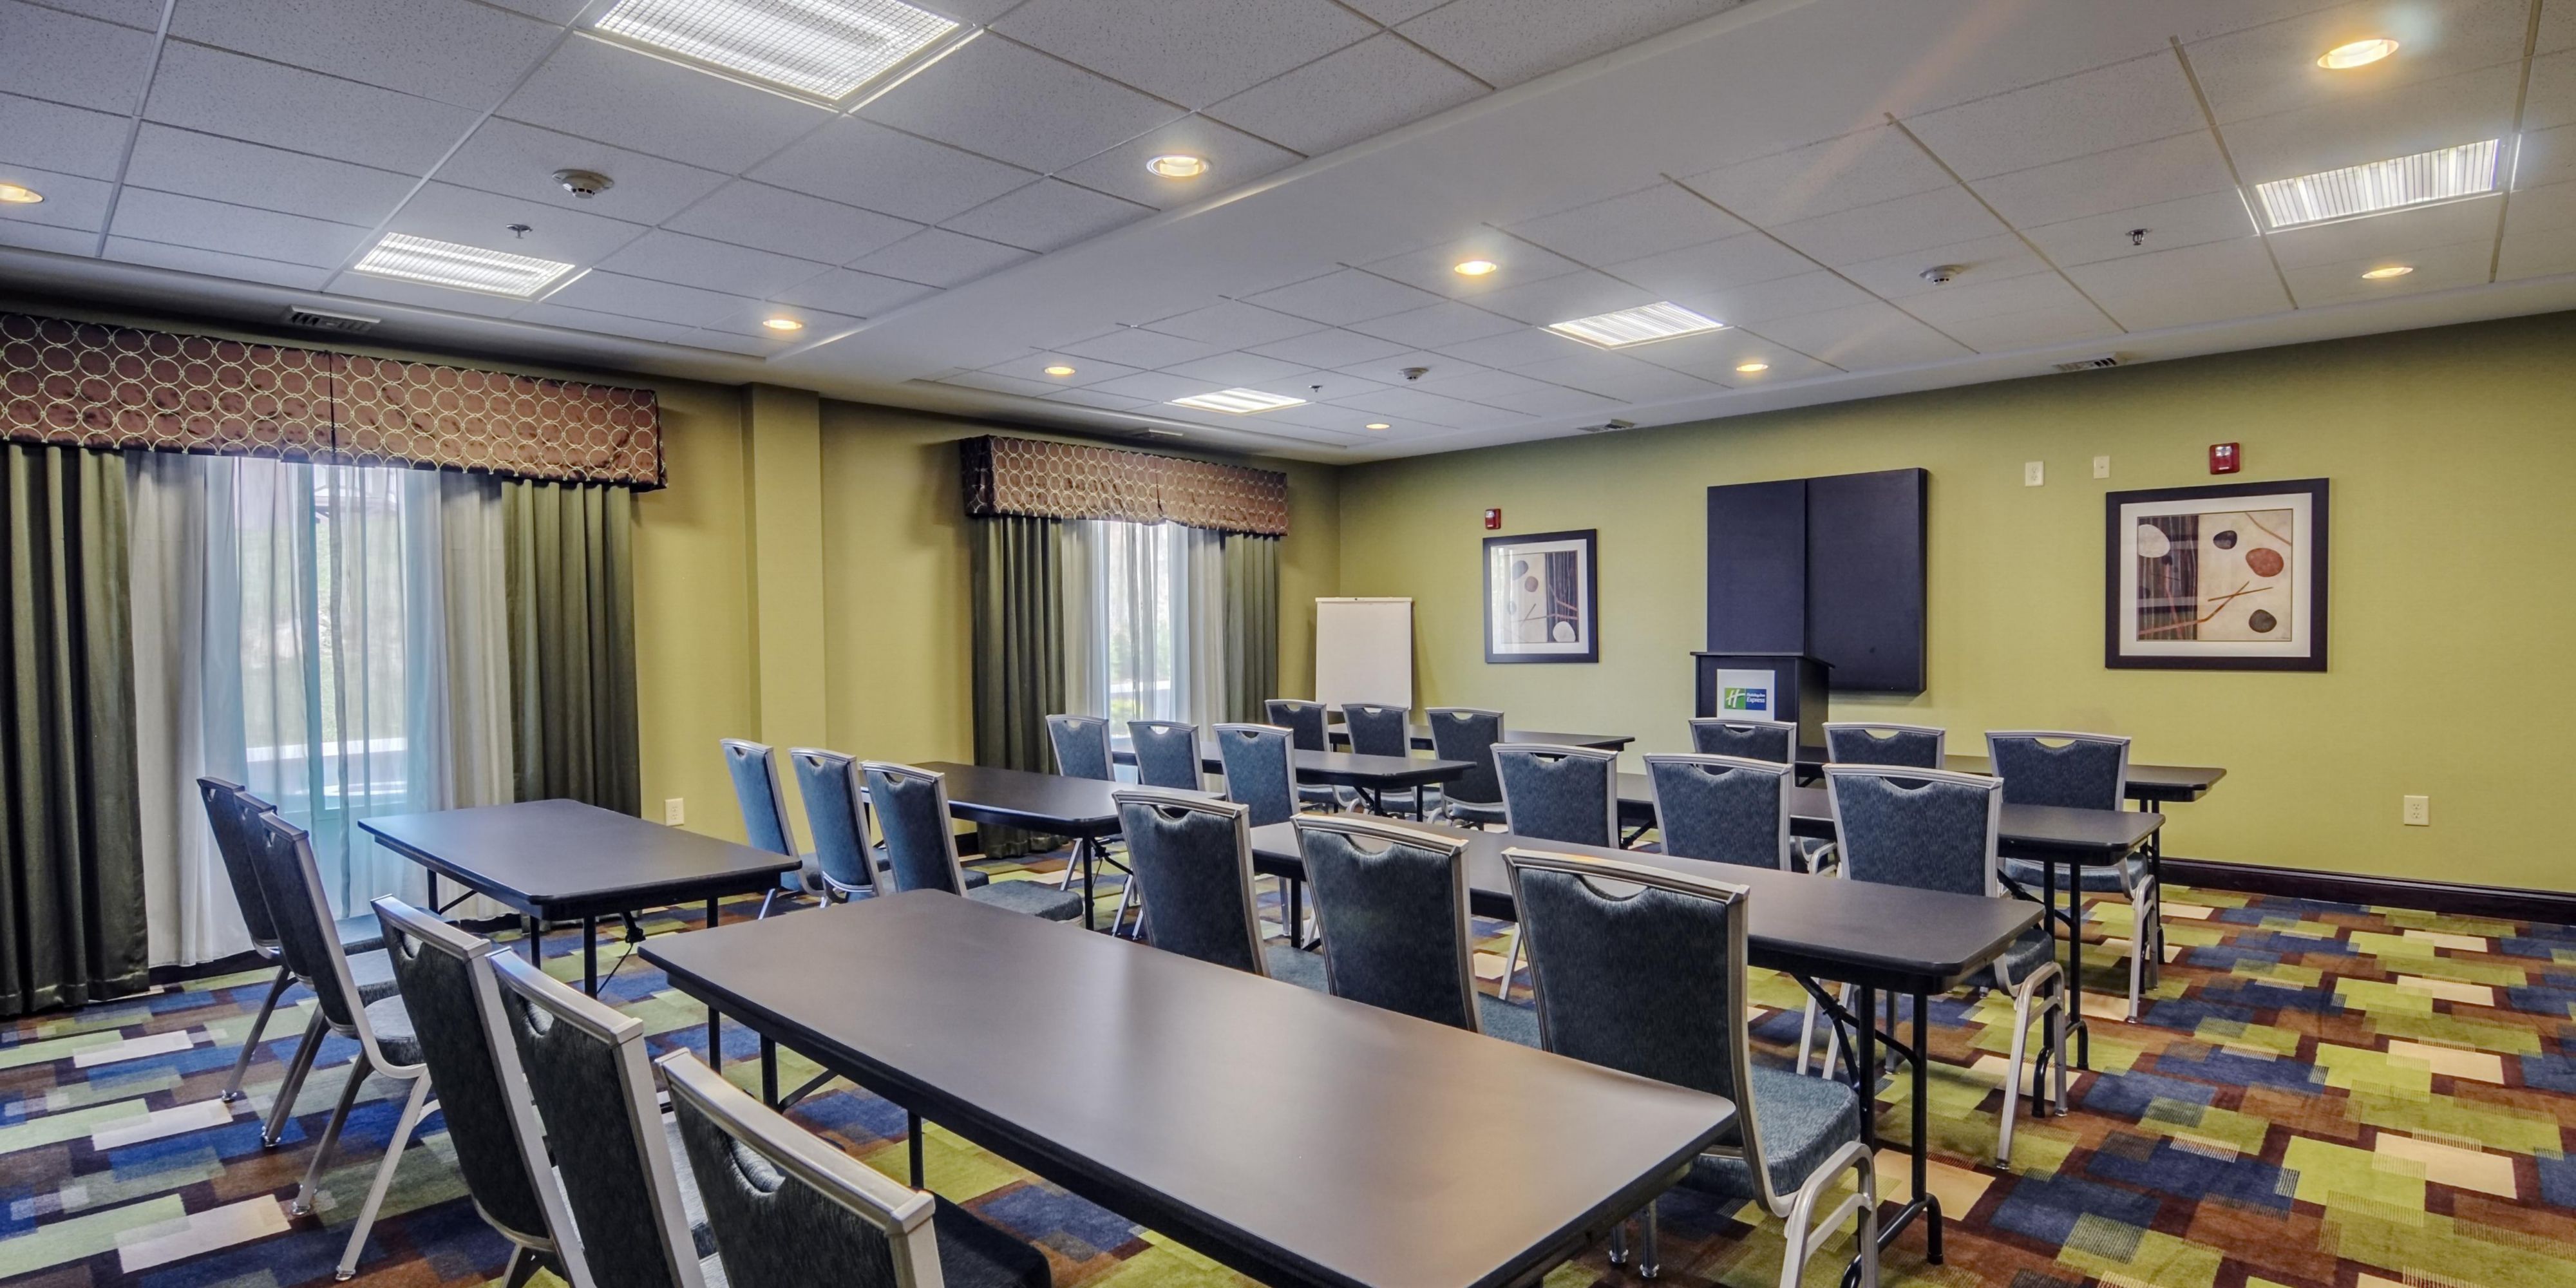 Our meeting room can hold up to 50 people, ideal for any small gathering or meeting you plan on having! 